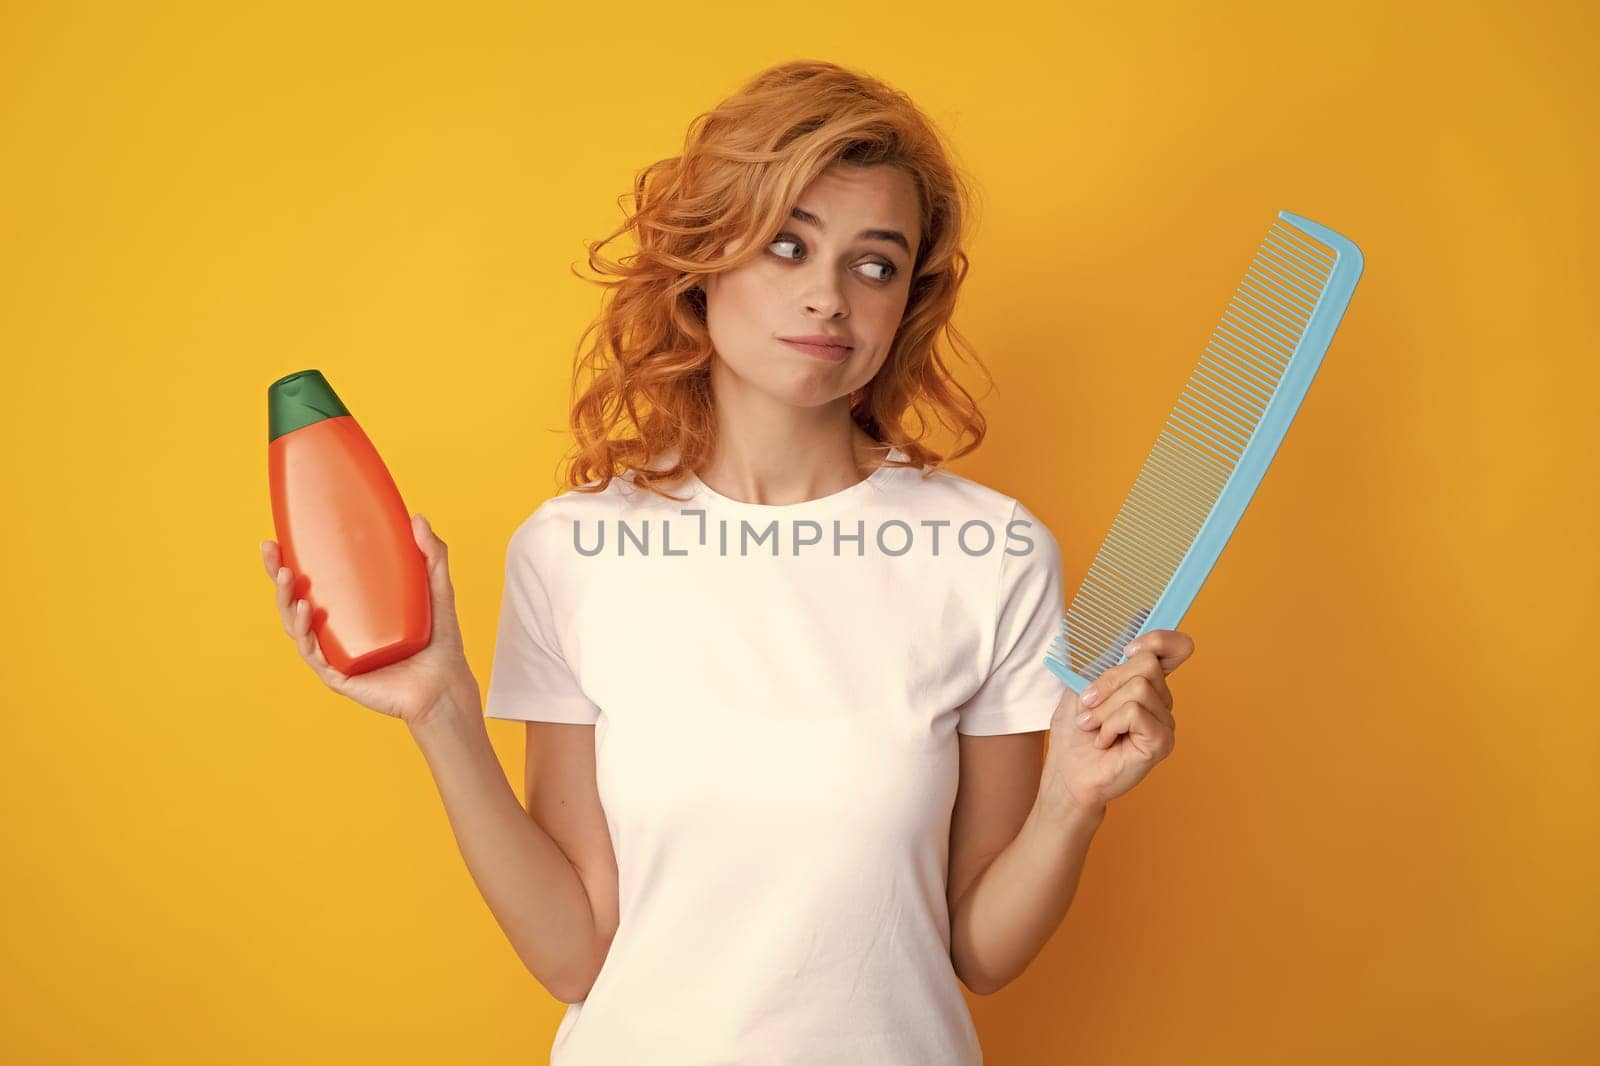 Angry woman hold bottle shampoo and conditioner. Redhead woman with a comb, isolated on yellow background